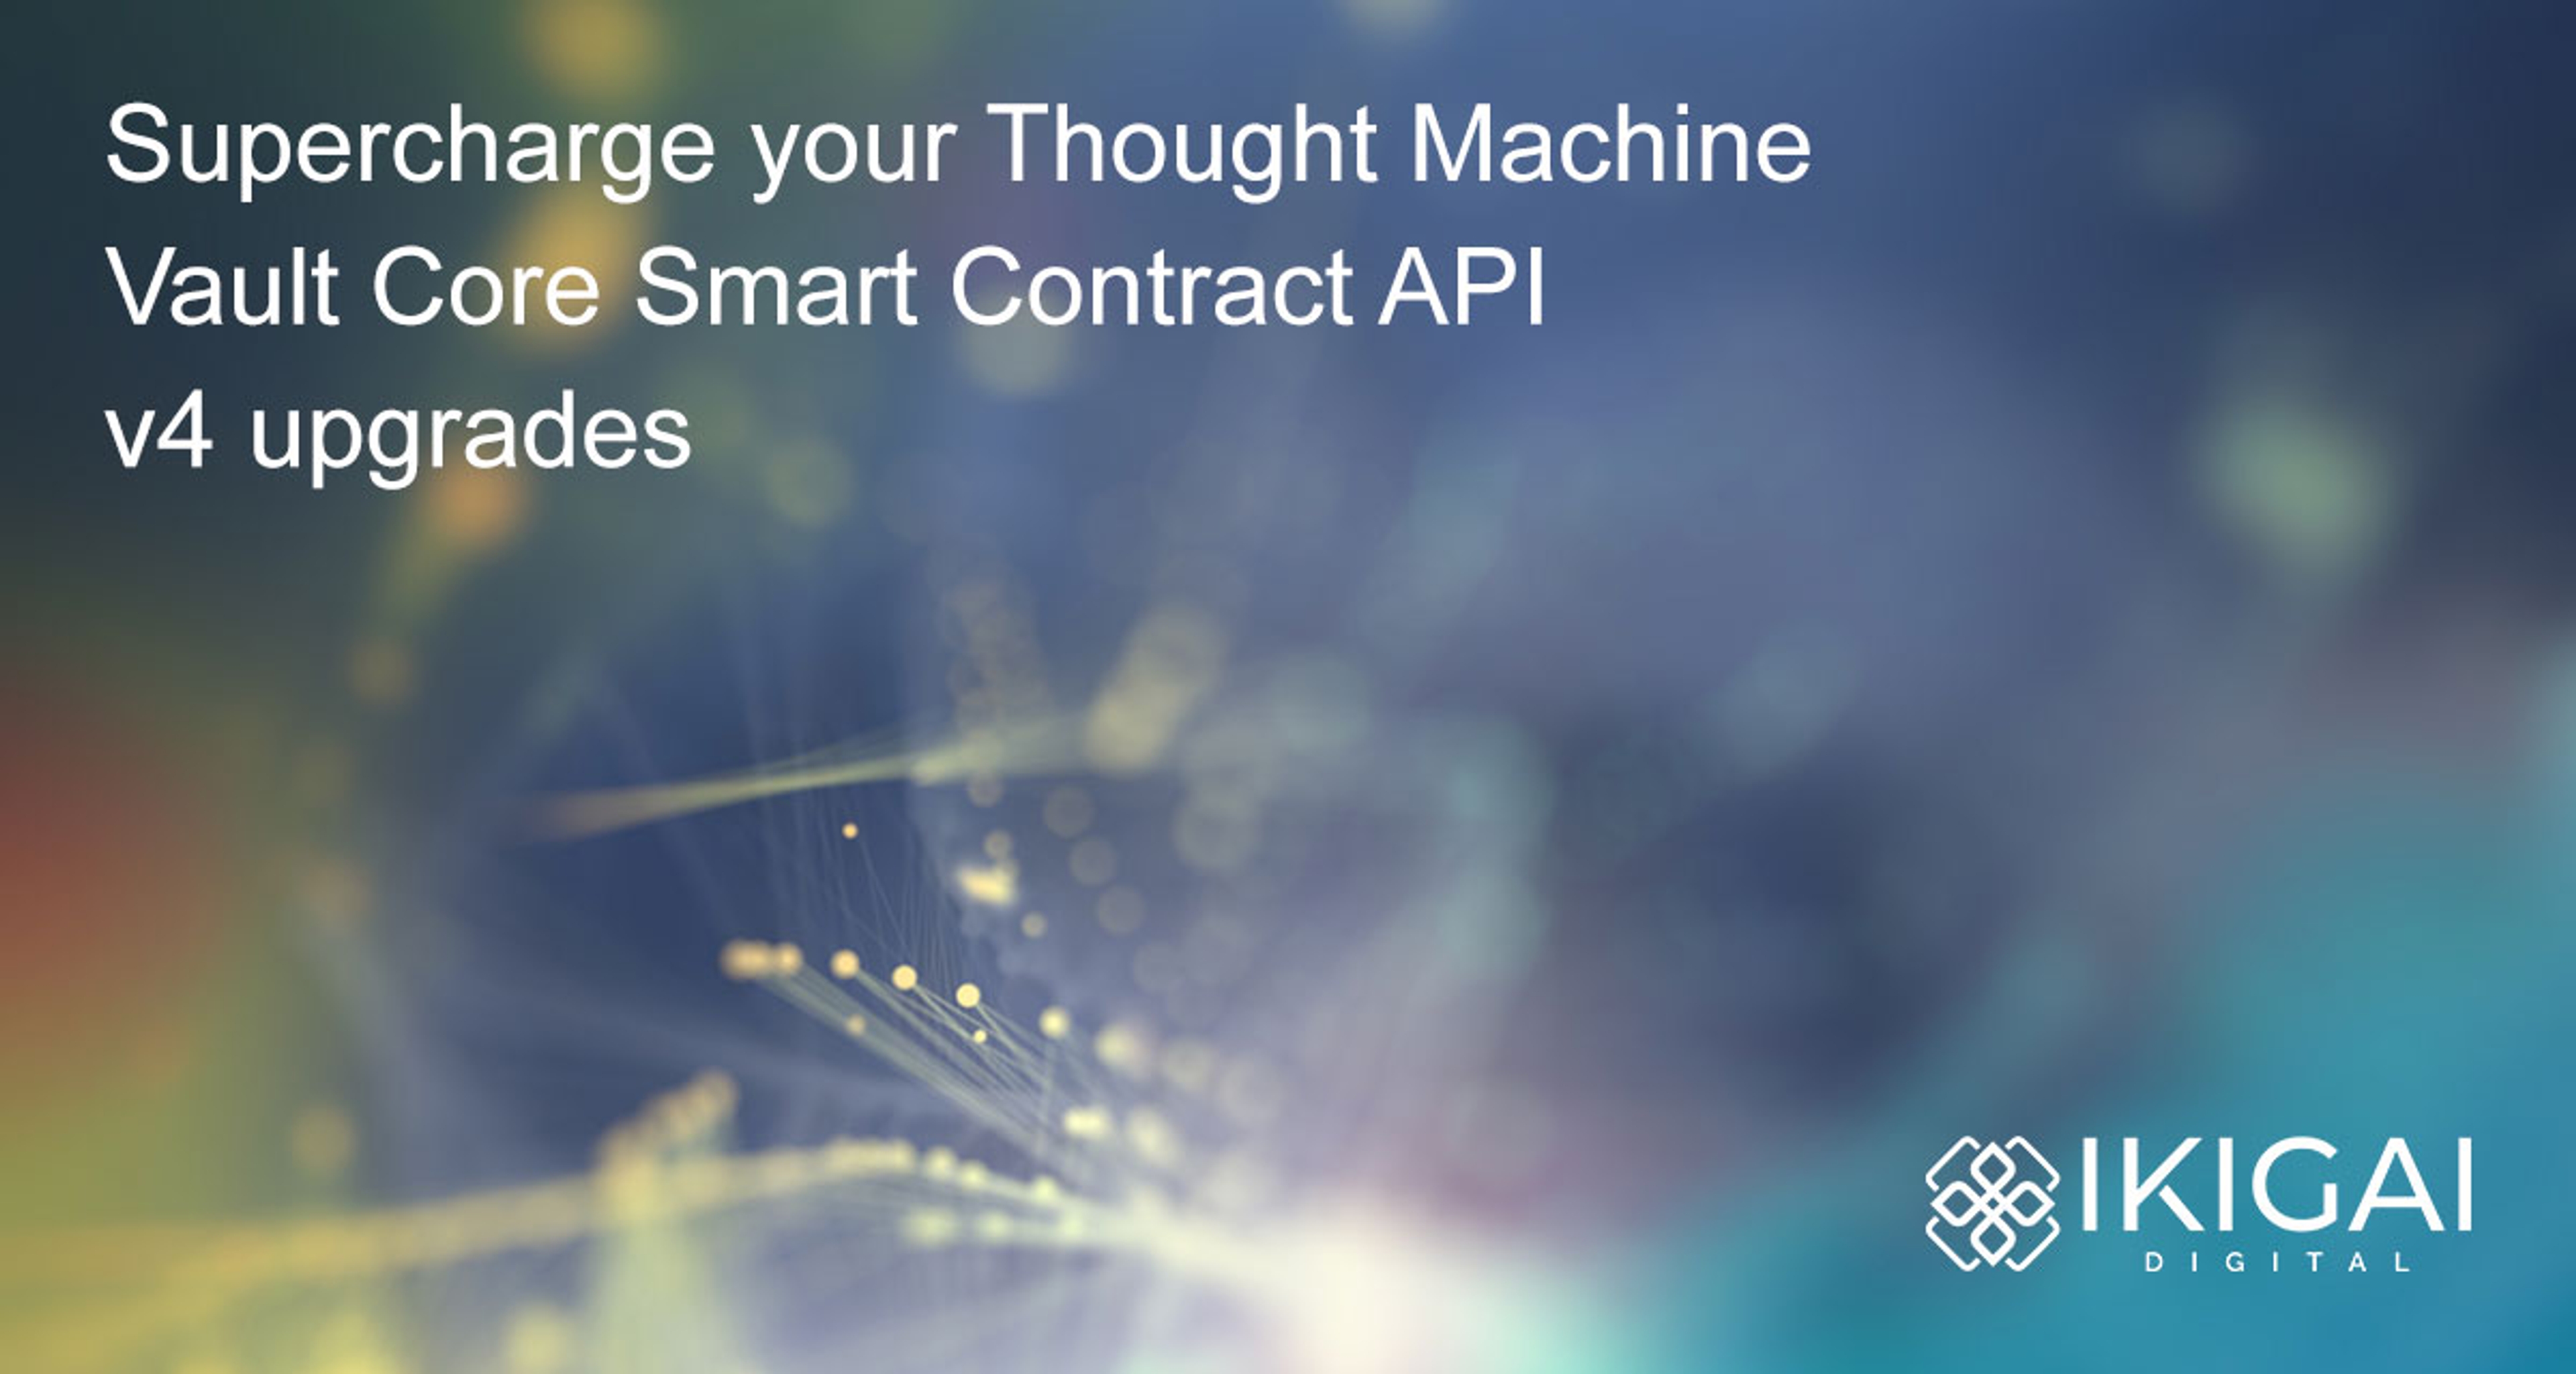 Supercharge your Thought Machine Vault Core Smart Contract API v4 upgrades